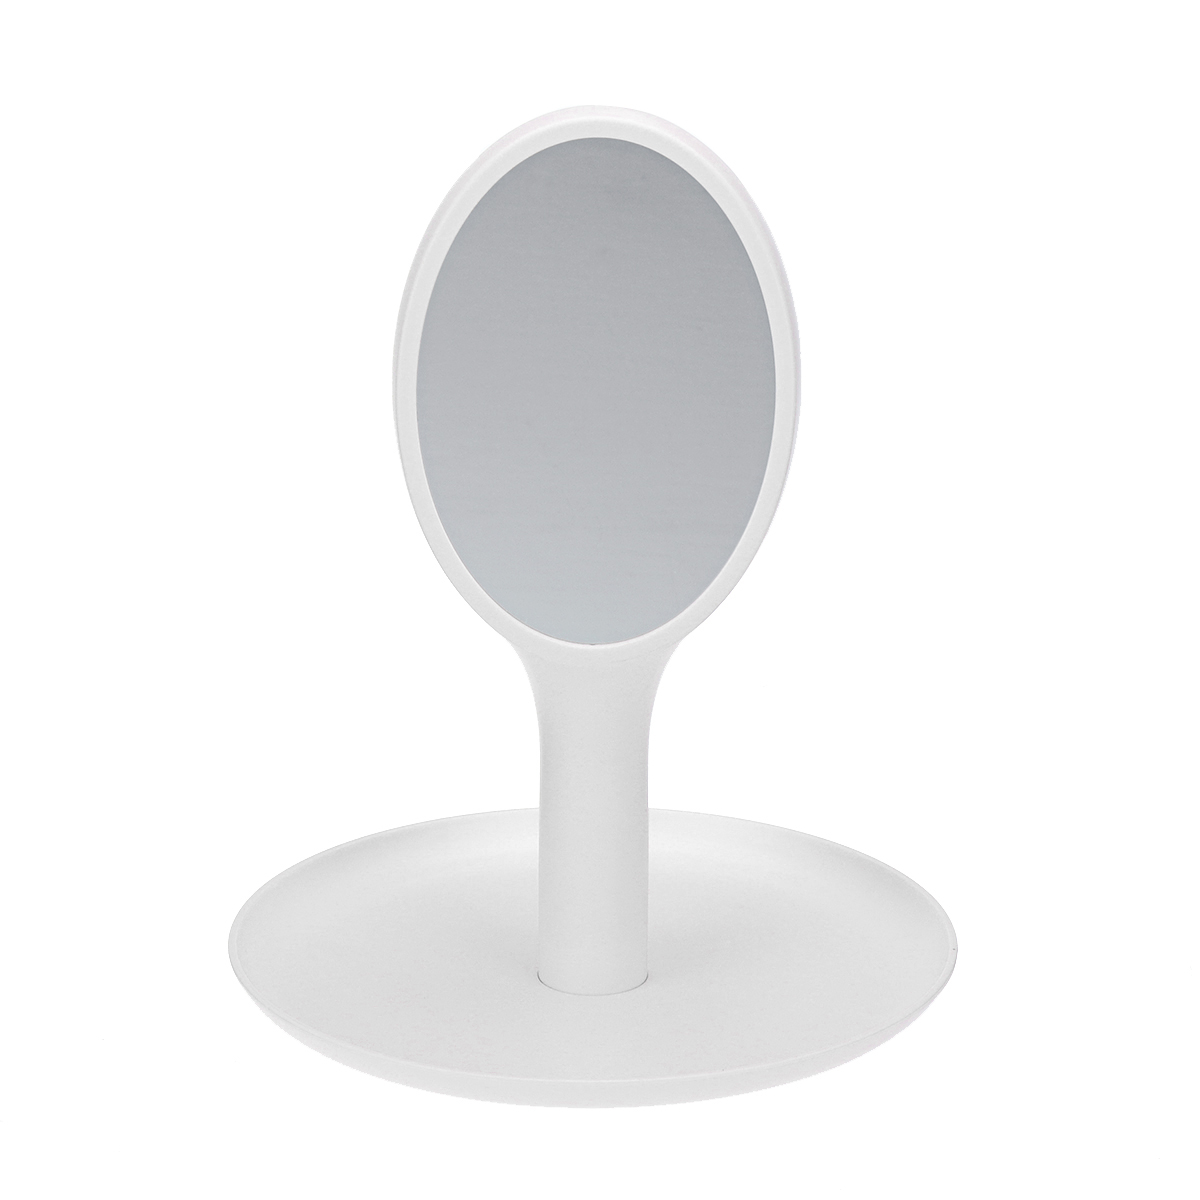 Double-Sided-Table-Makeup-Mirrors-Desktop-Cosmetics-Dressing-Beauty-Rotating-1643702-3